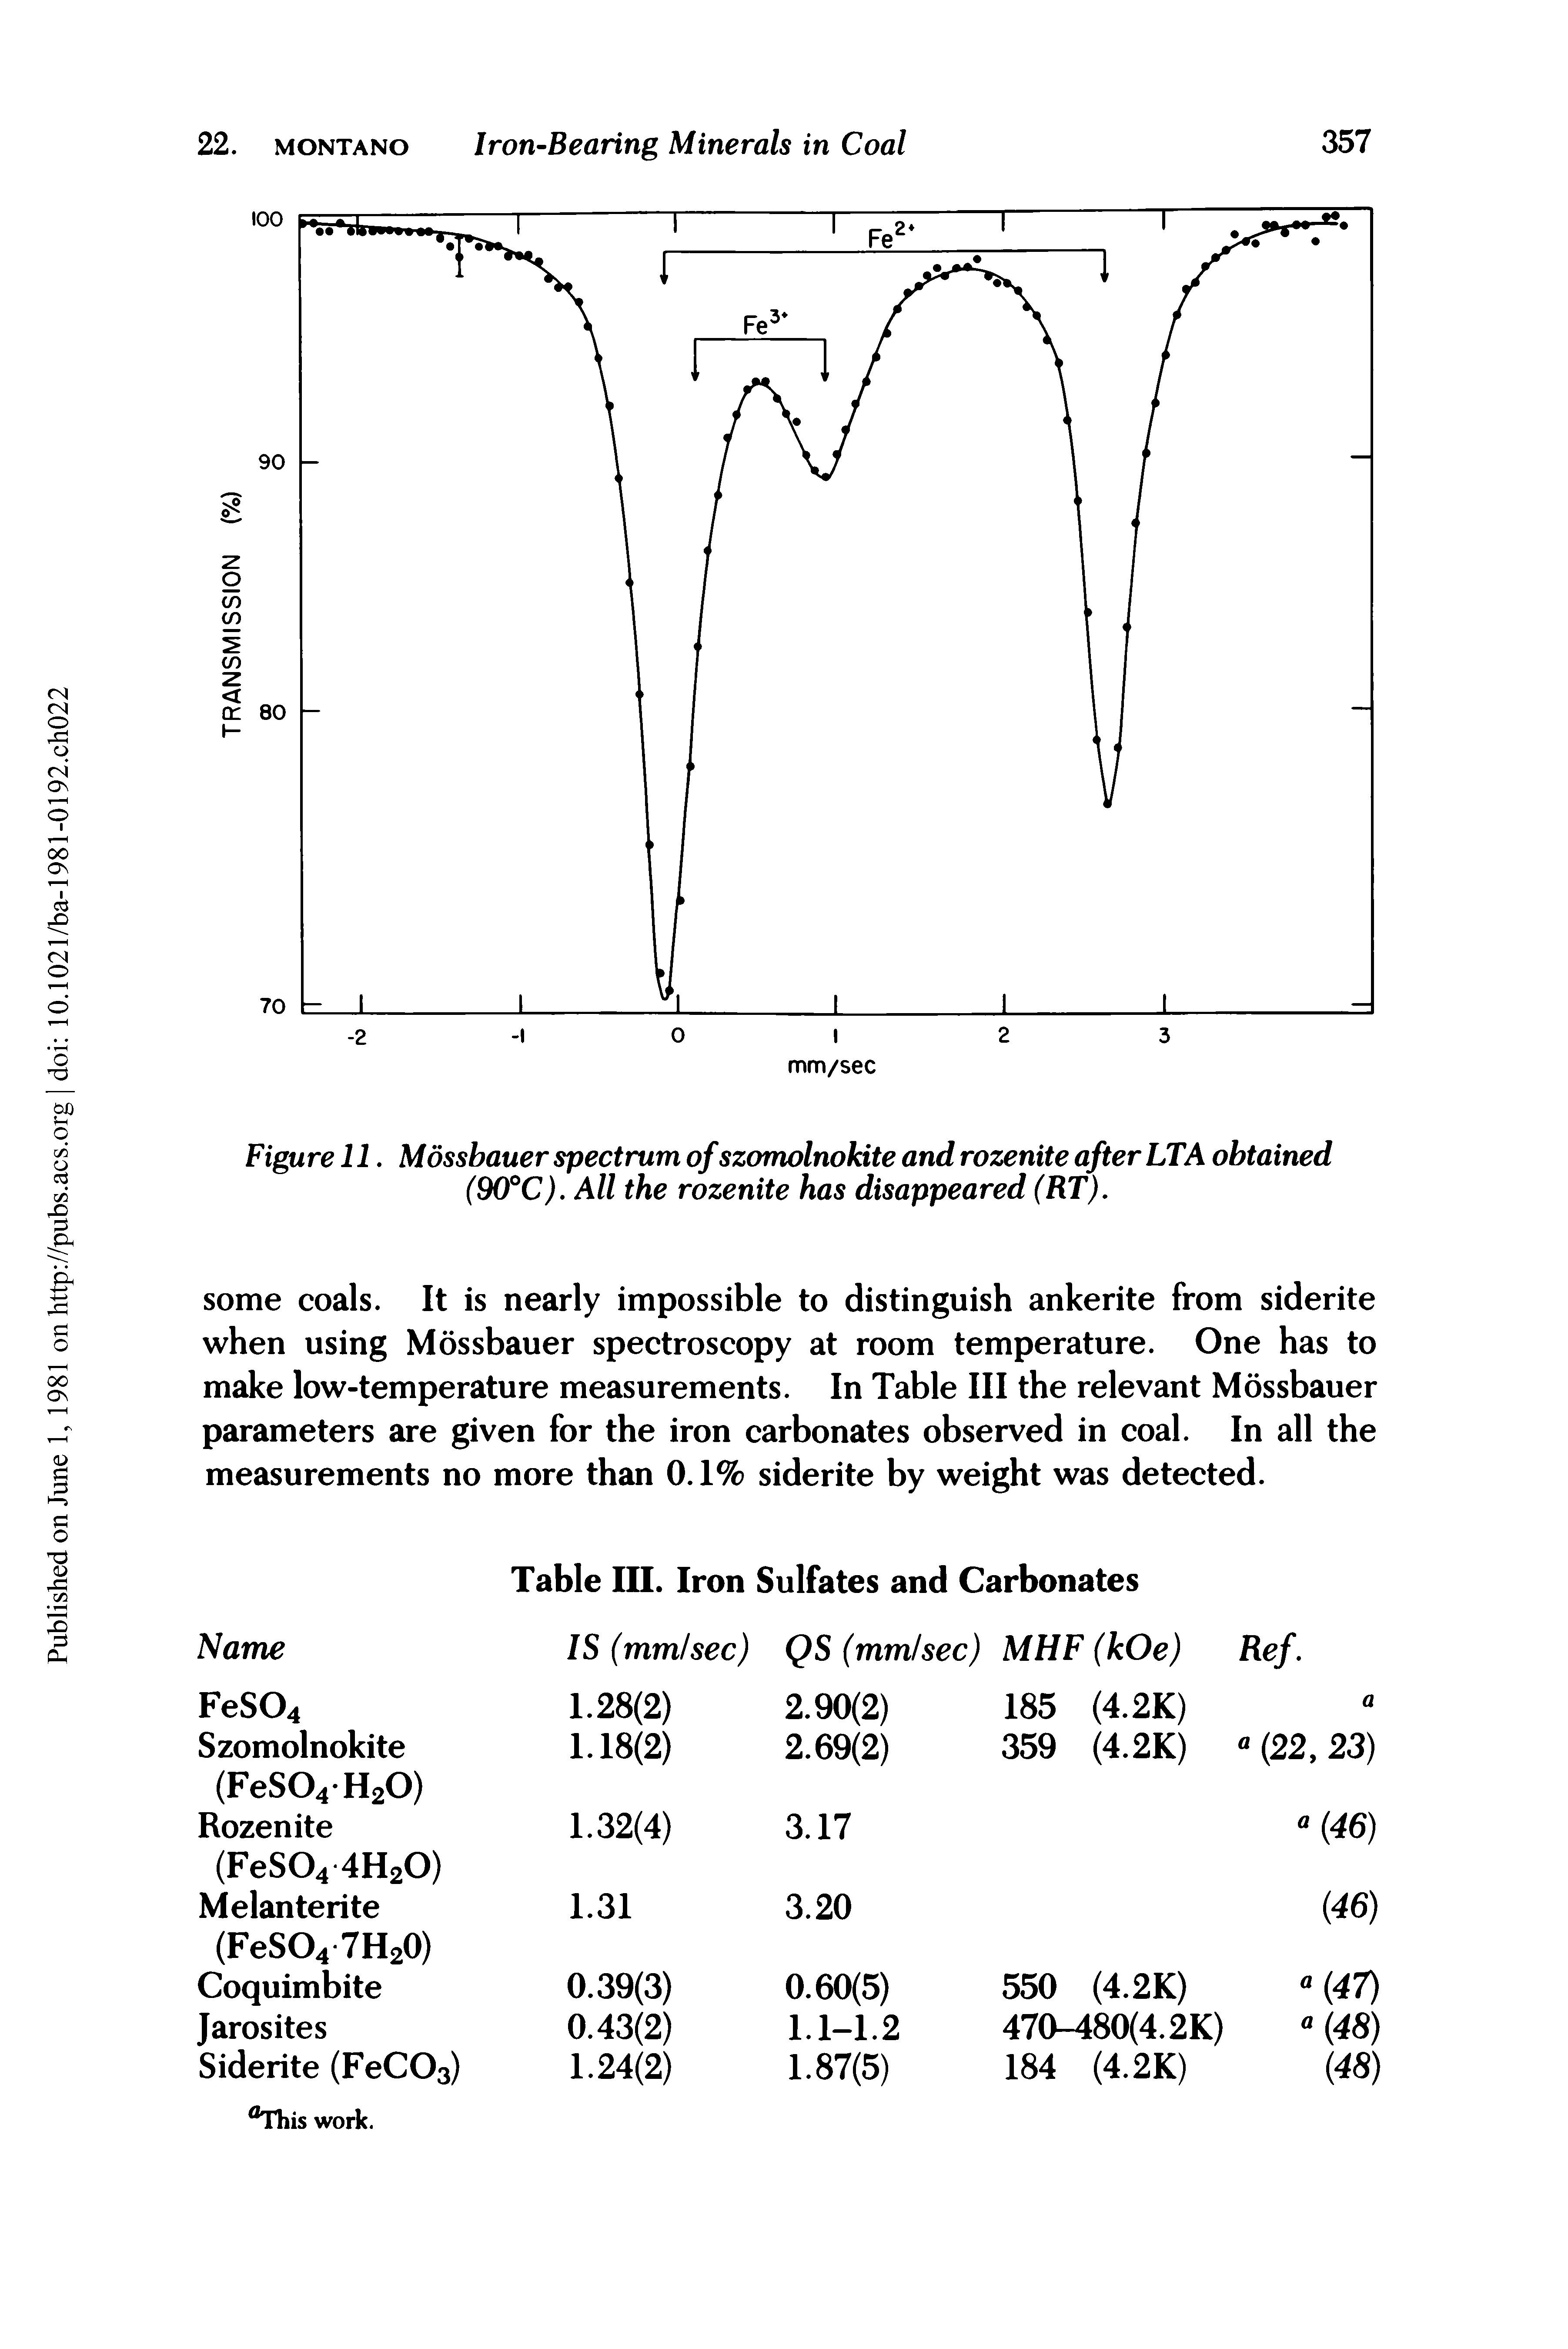 Figure 11. Mossbauer spectrum of szomolnokite and rozenite after LTA obtained (90°C). All the rozenite has disappeared (RT).